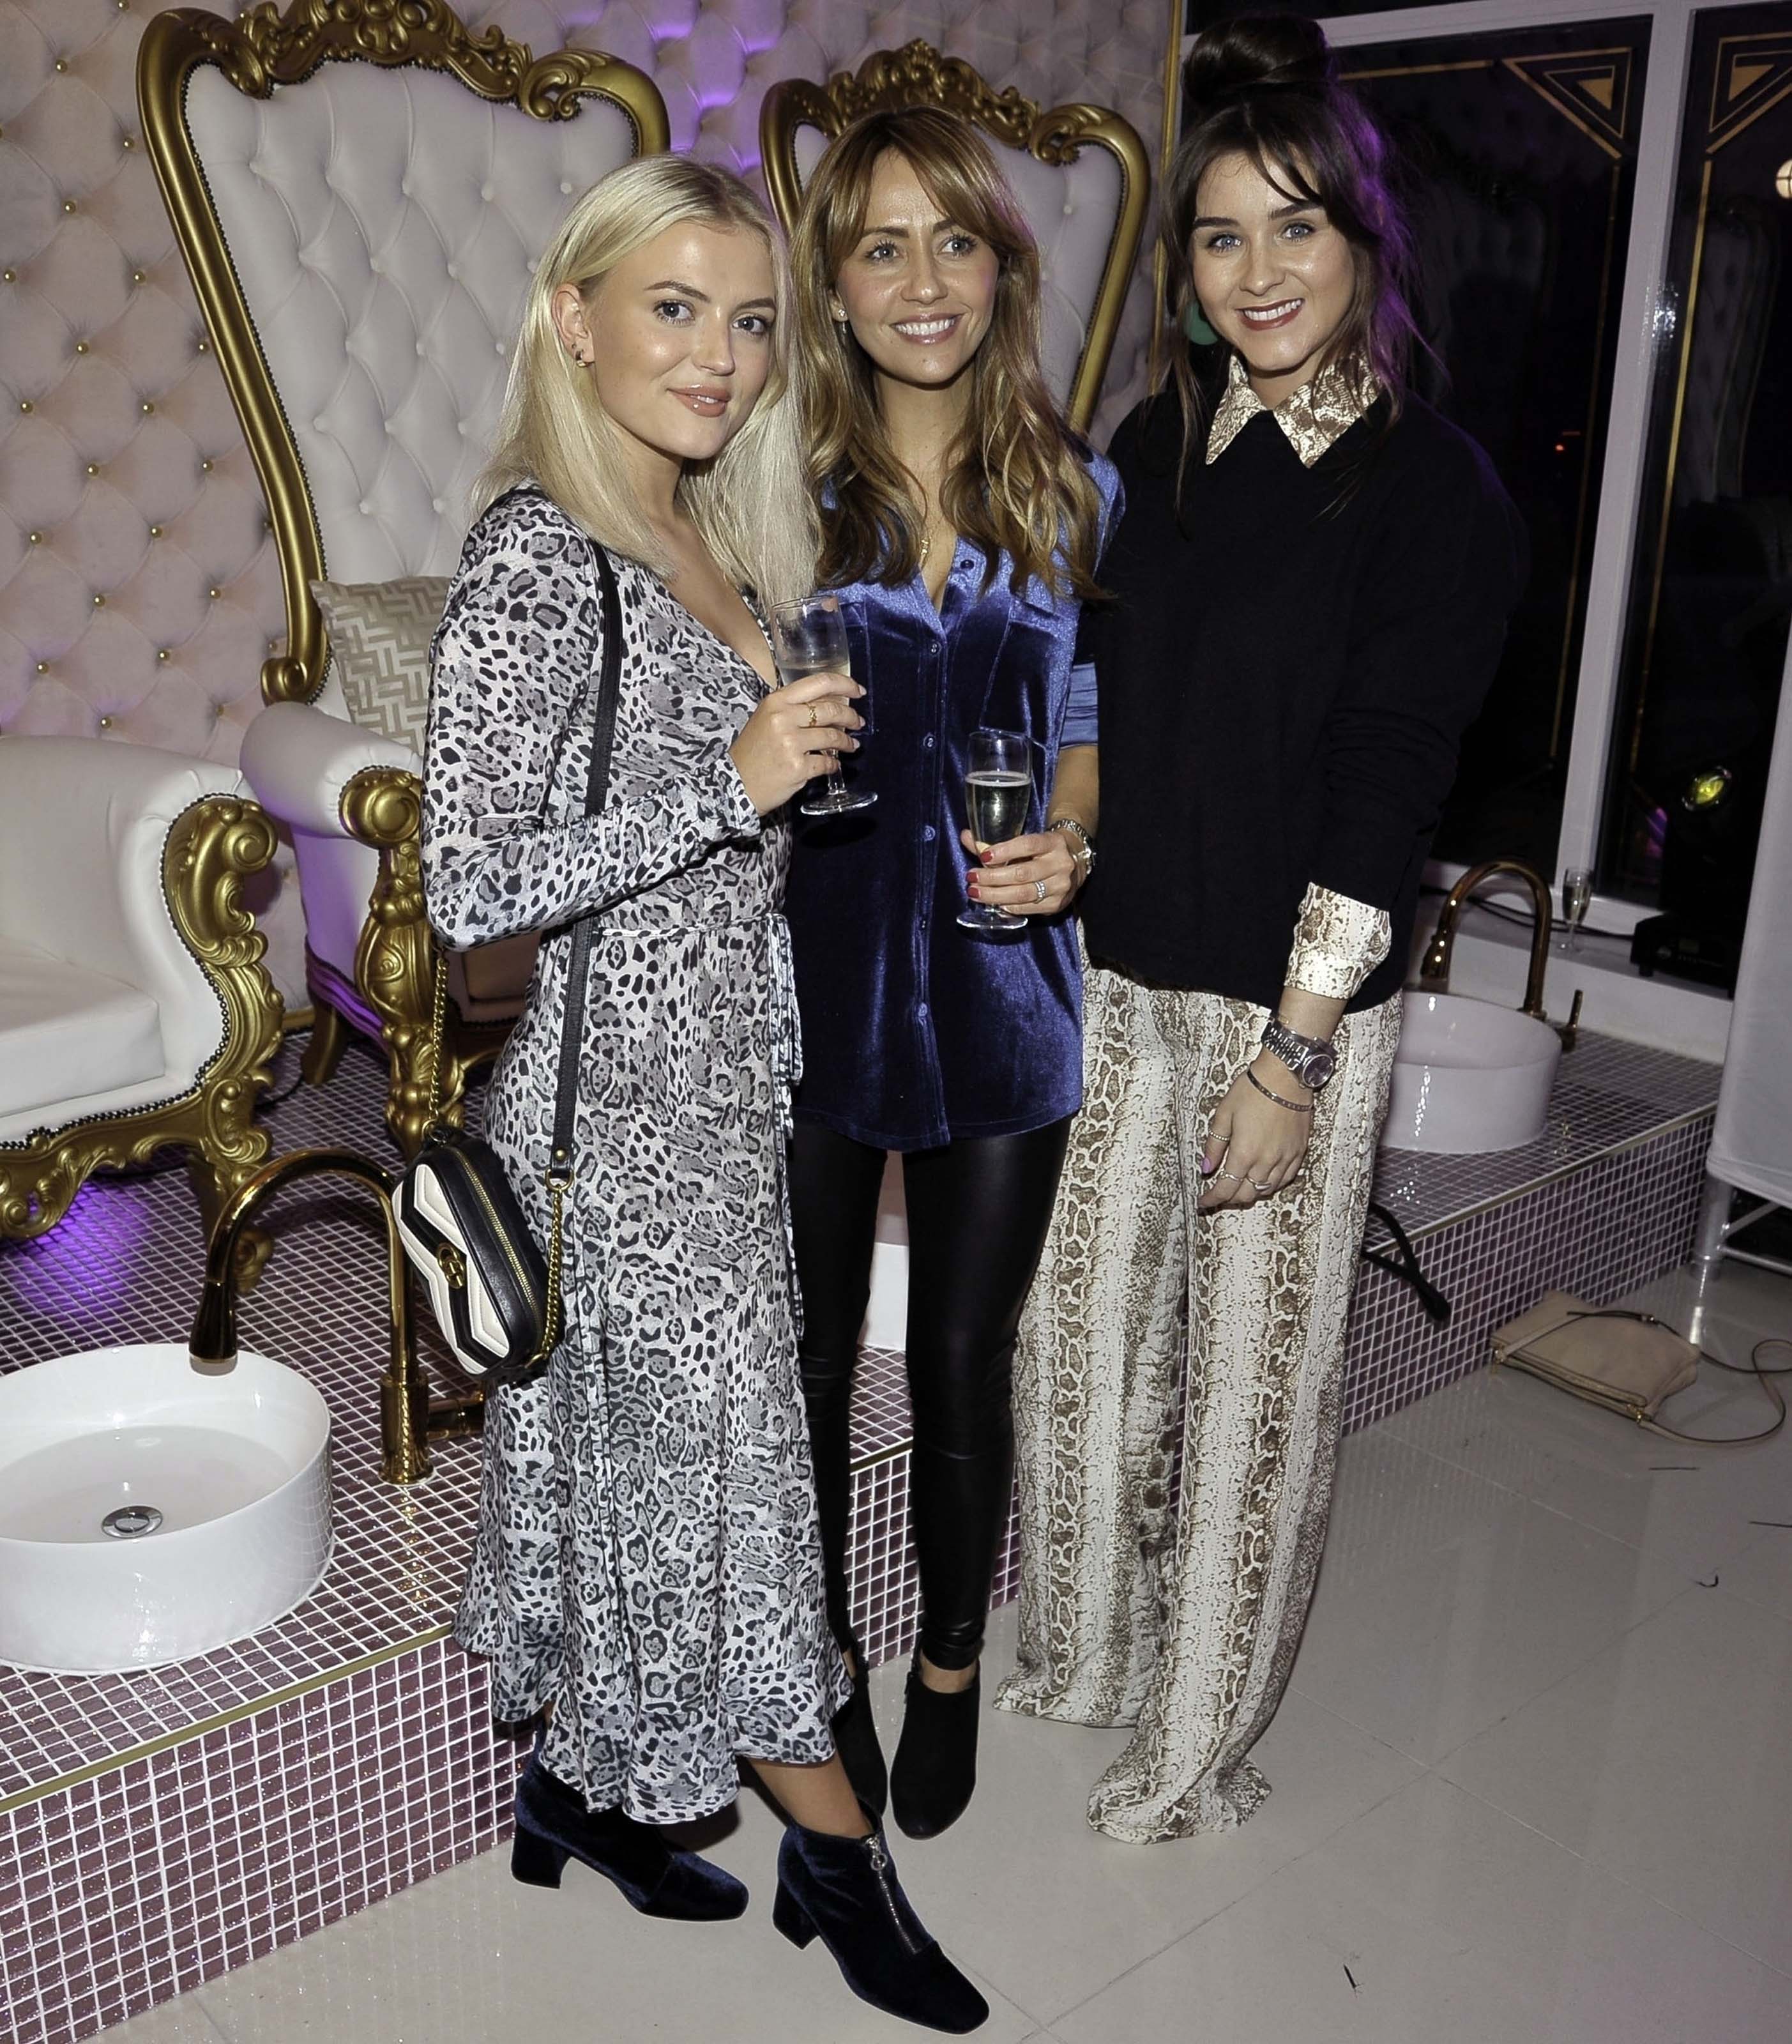 Lucy Fallon, Samia Ghadie & Brooke Vincent attend Scarlet Belle Daydreams Luxury Salon Launch